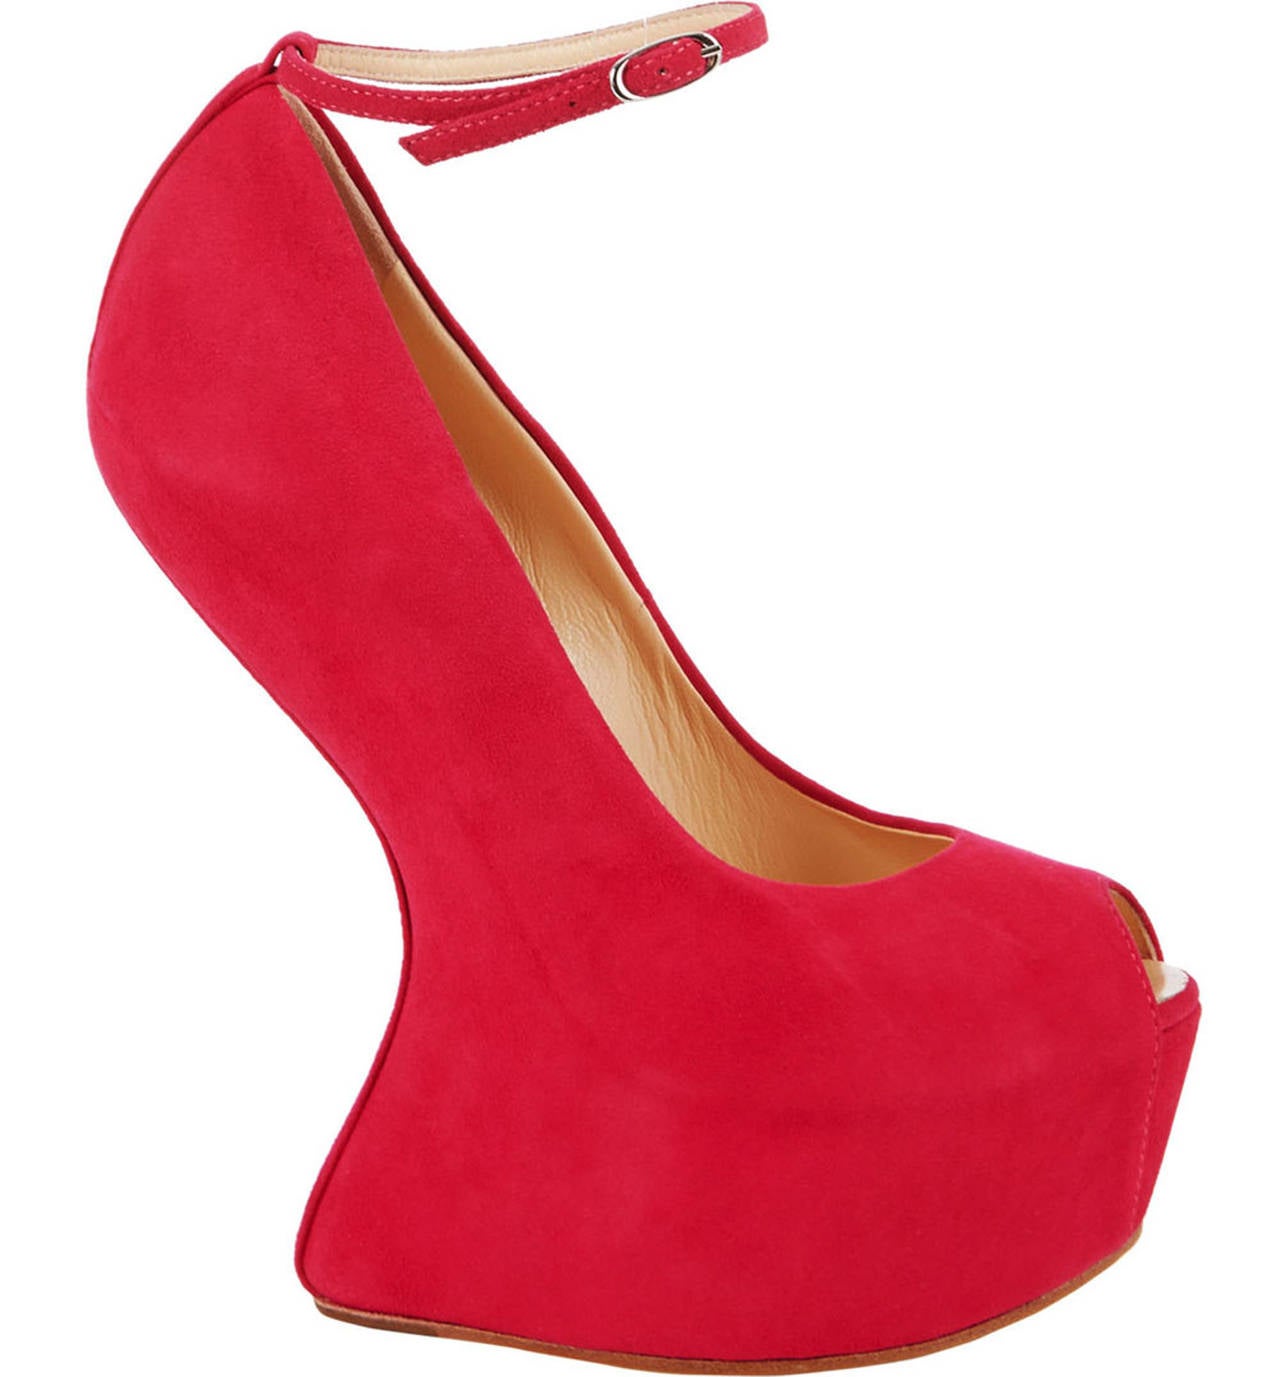 FABULOUSLY FEMININE SCULPTED WEDGES IN BOUGANVILLE FUCHSIA SUEDE WITH A SLIM ANKLE STRAP.
 

ITALIAN SIZES 39 and 39.5

FUCHSIA SUEDE (GOAT)

DESIGNER COLOR – BOUGANVILLE FUCHSIA

CONTOURED WEDGE HEEL APPROX. - 6.5” with 1.75”